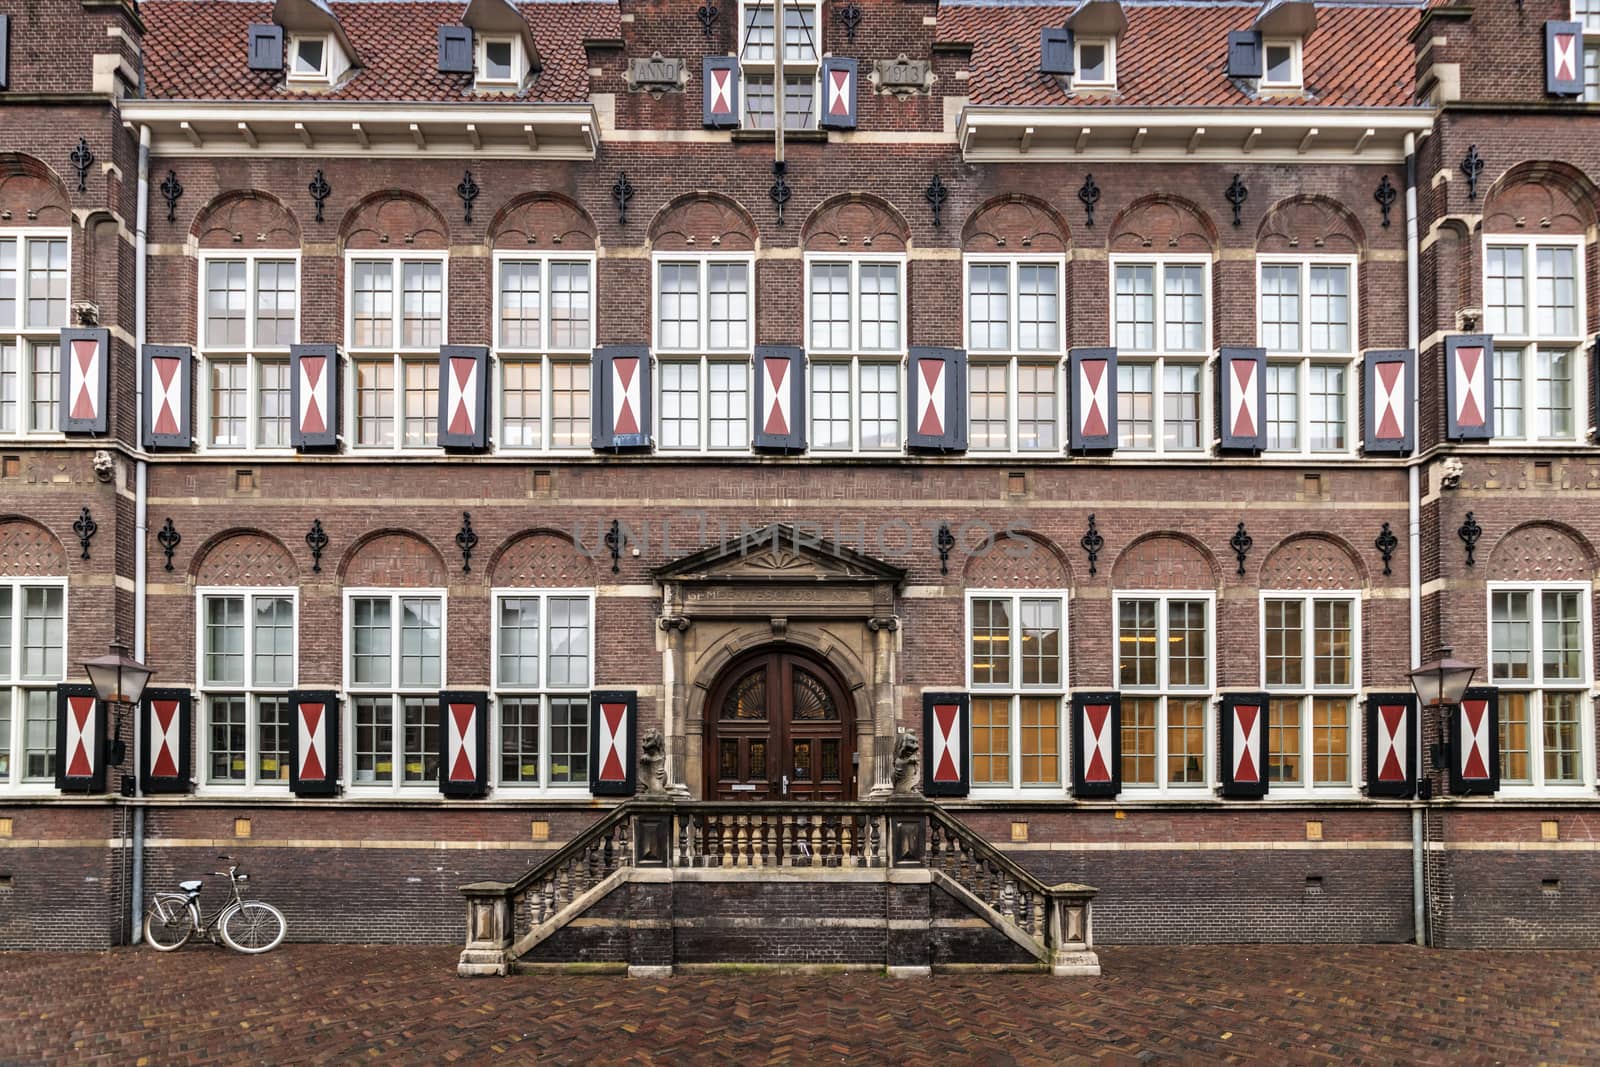 Flemish architecture school brick facade with a bicycle parking in front, Amsterdam, Netherlands by ankorlight